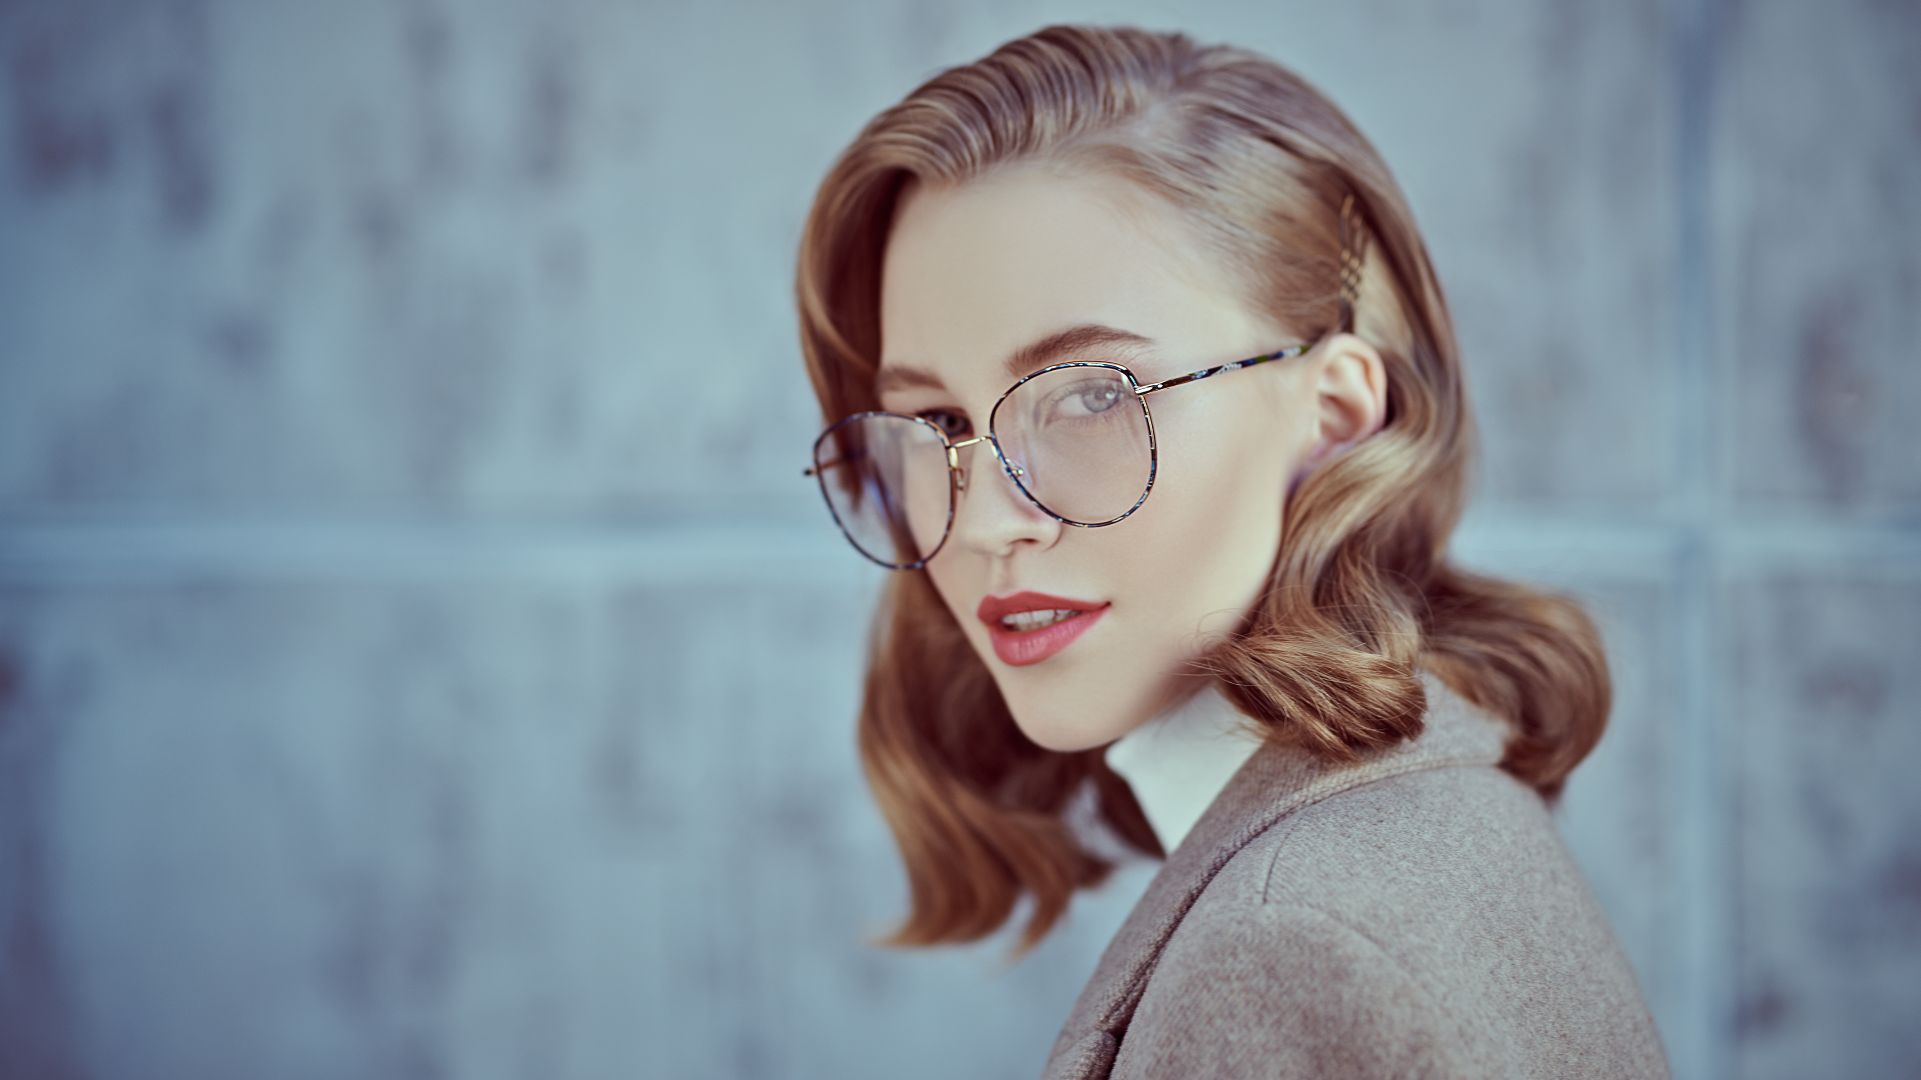 William Morris London has been acquired by Design Eyewear Group